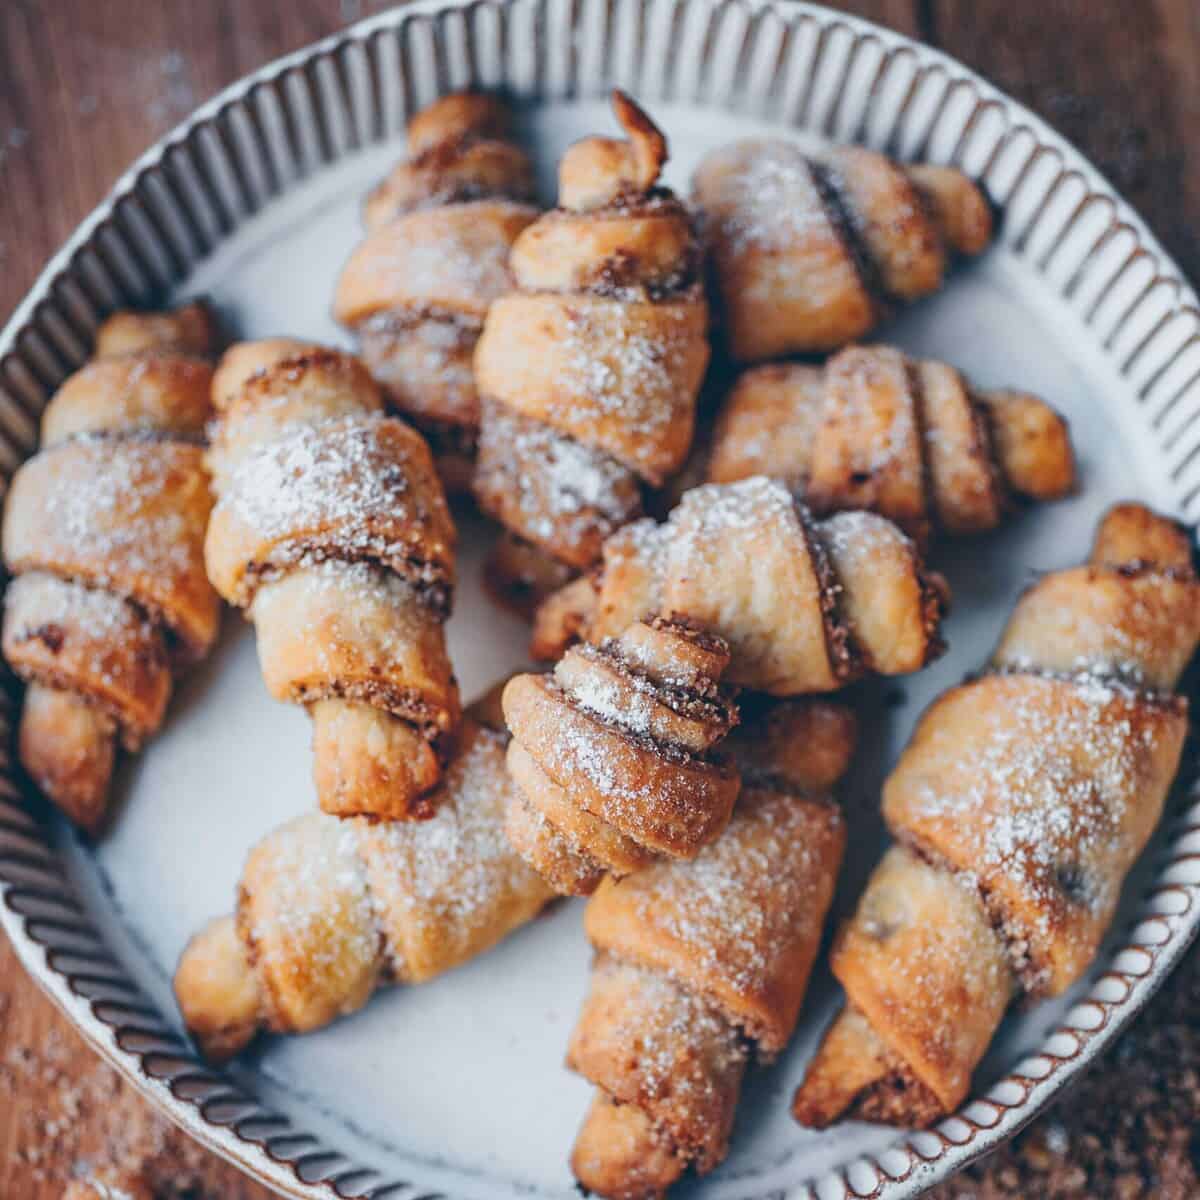  Get ready for a burst of sweet flavors with every bite of these vegan rugelach.